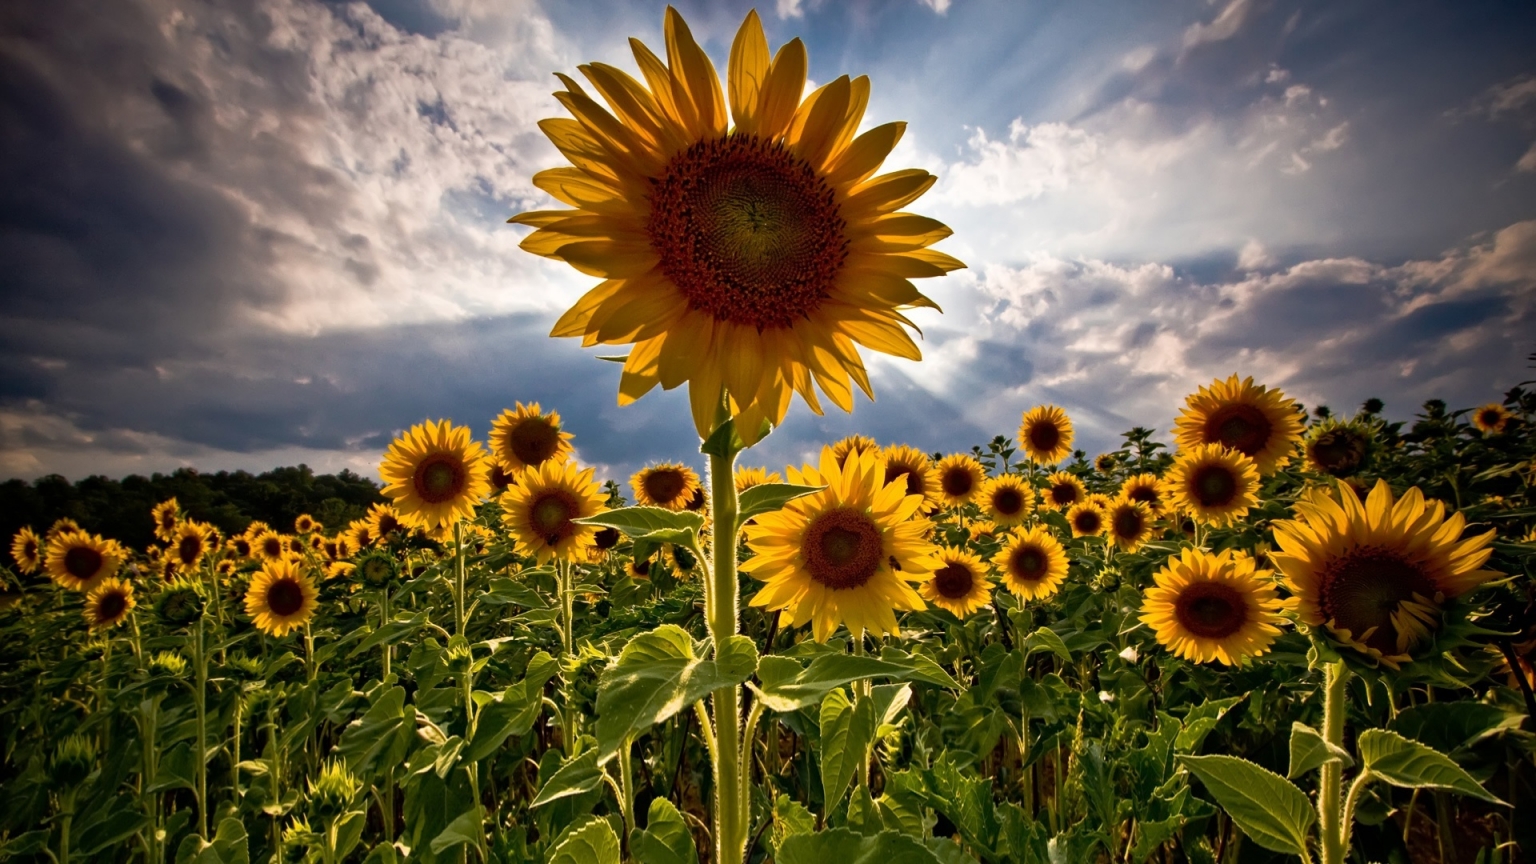 Amazing Sunflowers for 1536 x 864 HDTV resolution